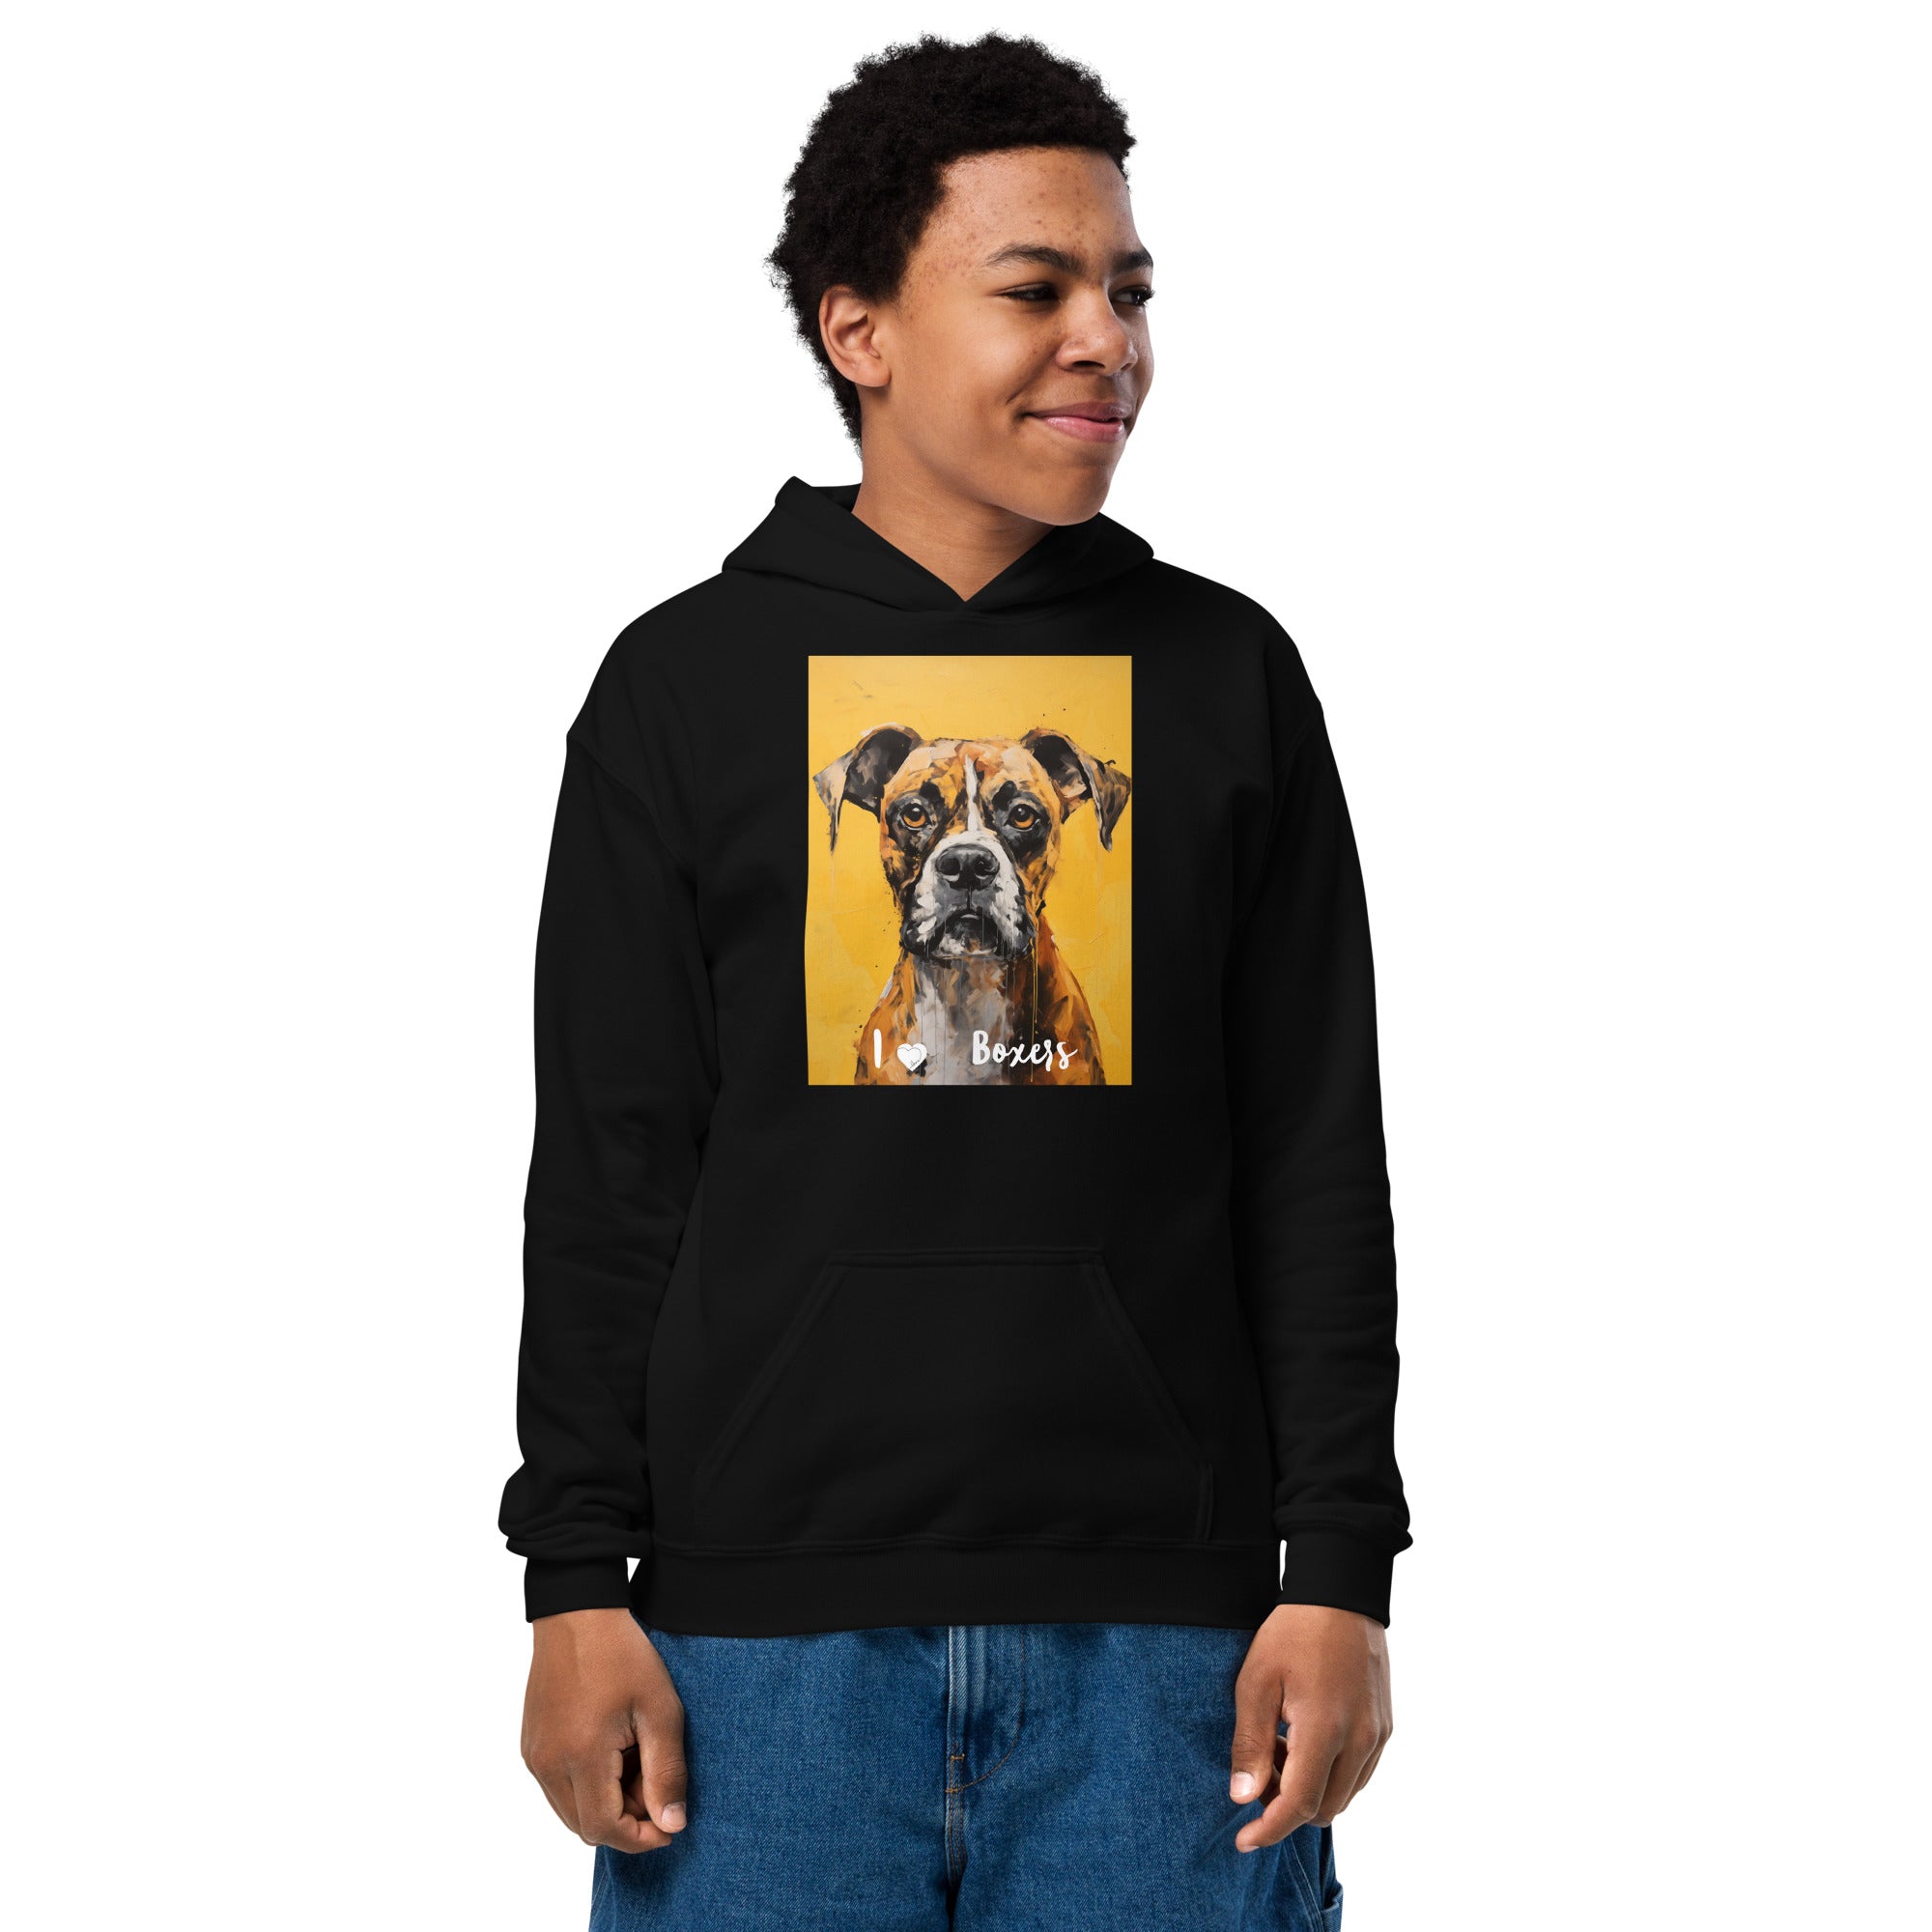 Youth heavy blend hoodie - I ❤ Dogs - Boxer